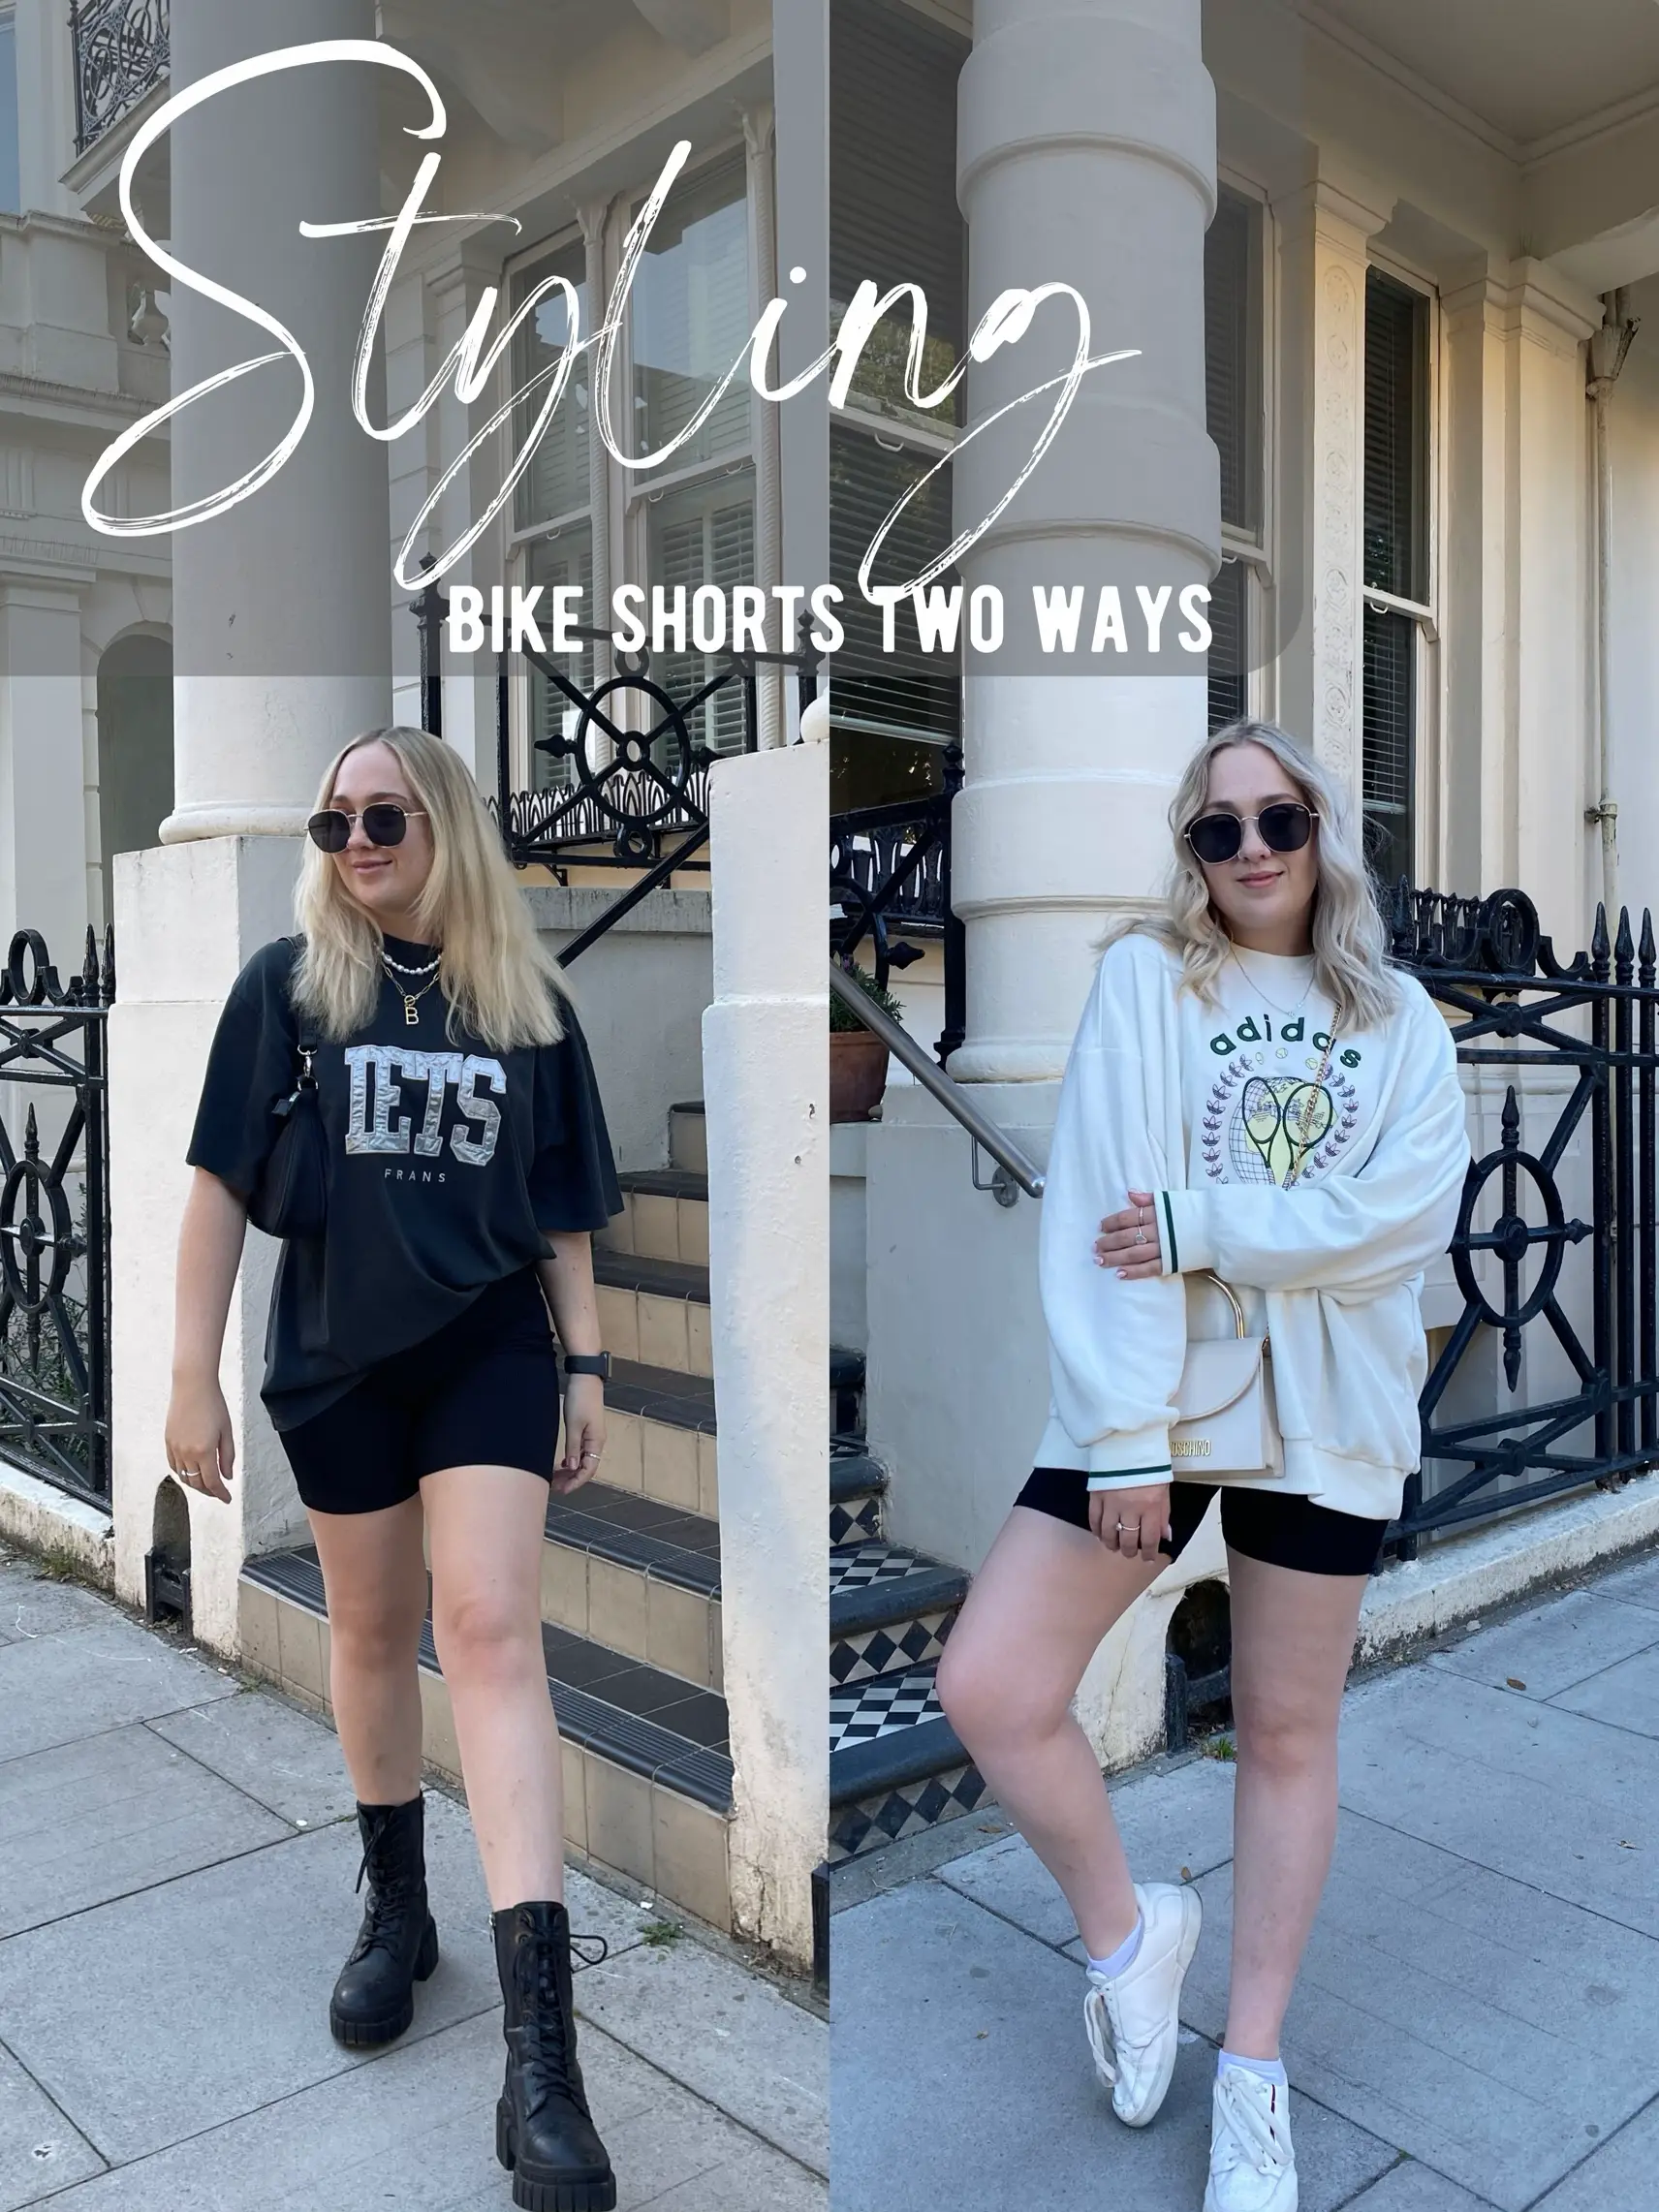 Styling Bike shorts two ways - look book 🖤, Gallery posted by Beckahake